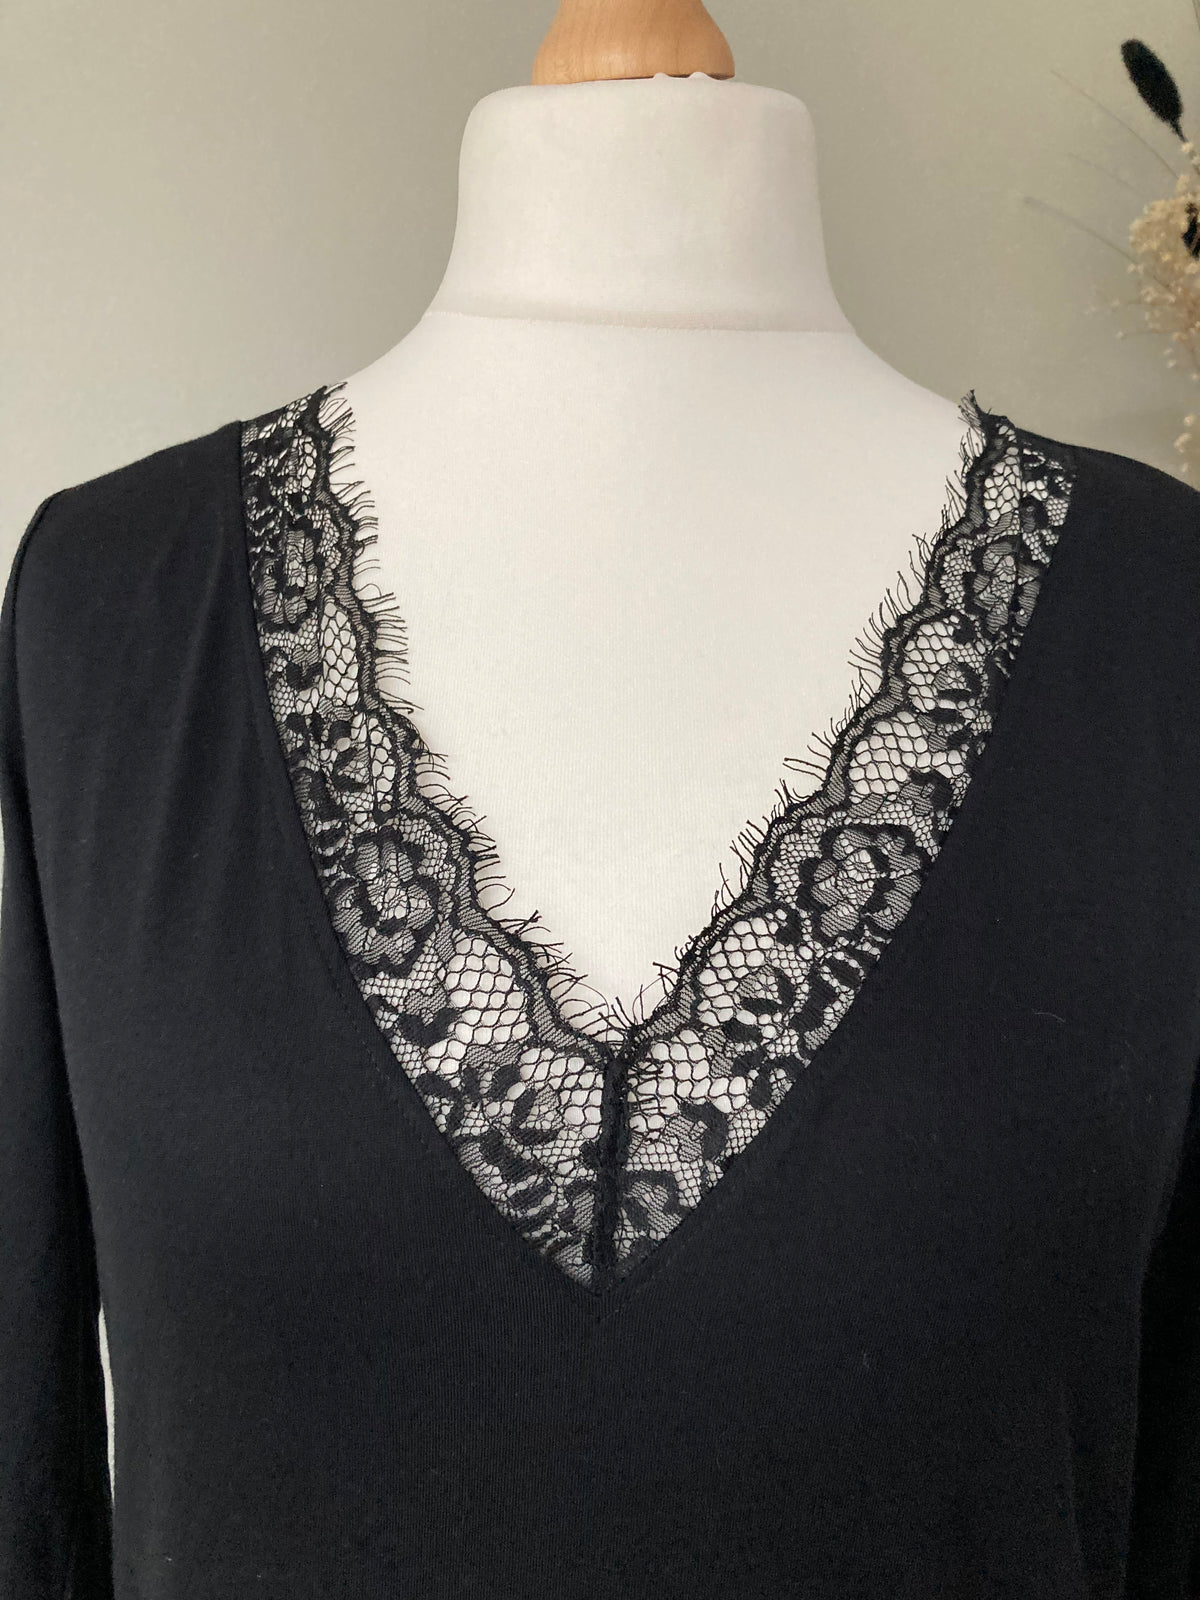 Black lace long sleeve pj top by CREATION L - Size 14